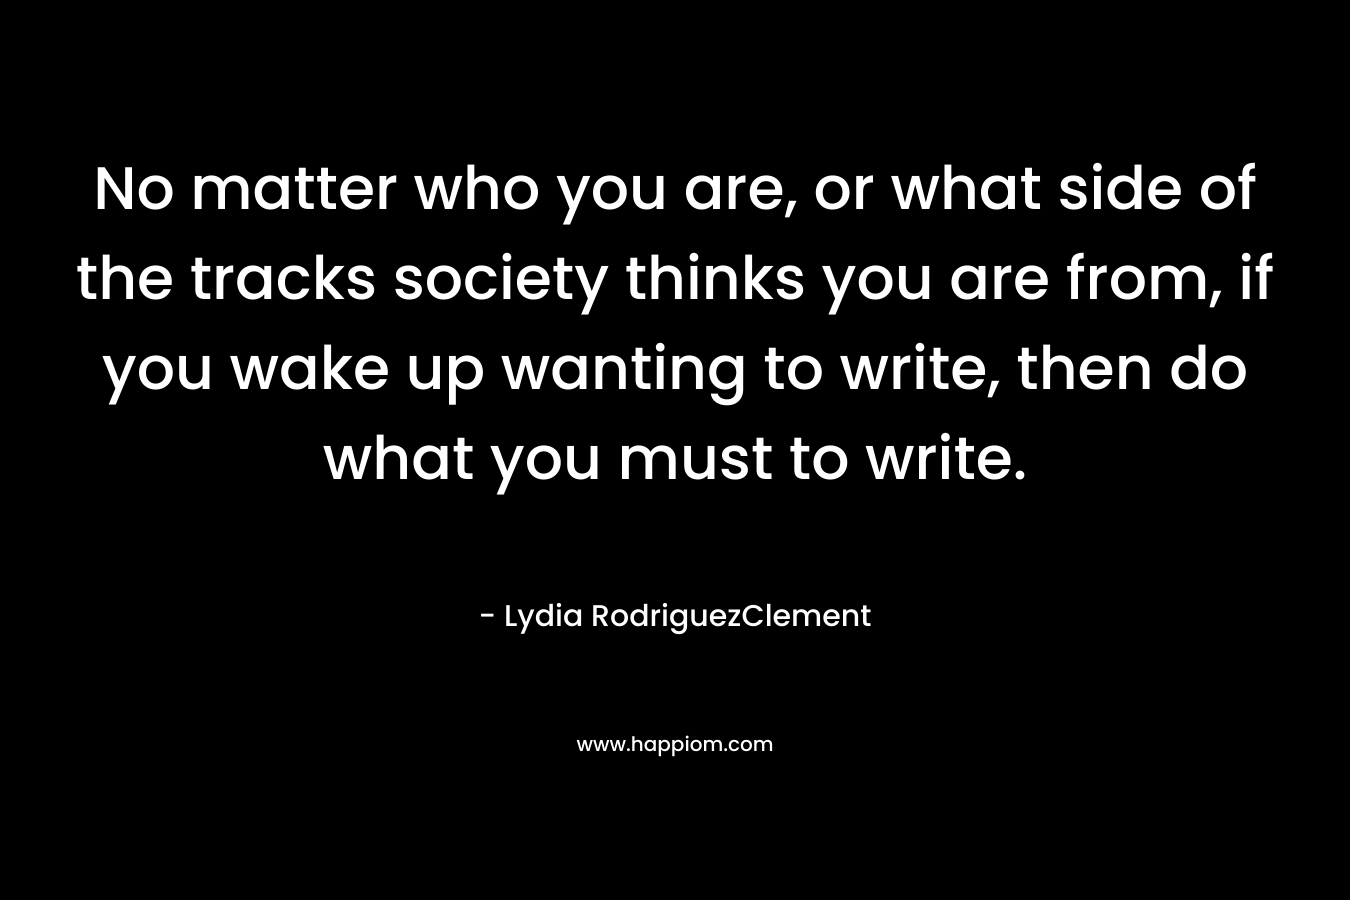 No matter who you are, or what side of the tracks society thinks you are from, if you wake up wanting to write, then do what you must to write.